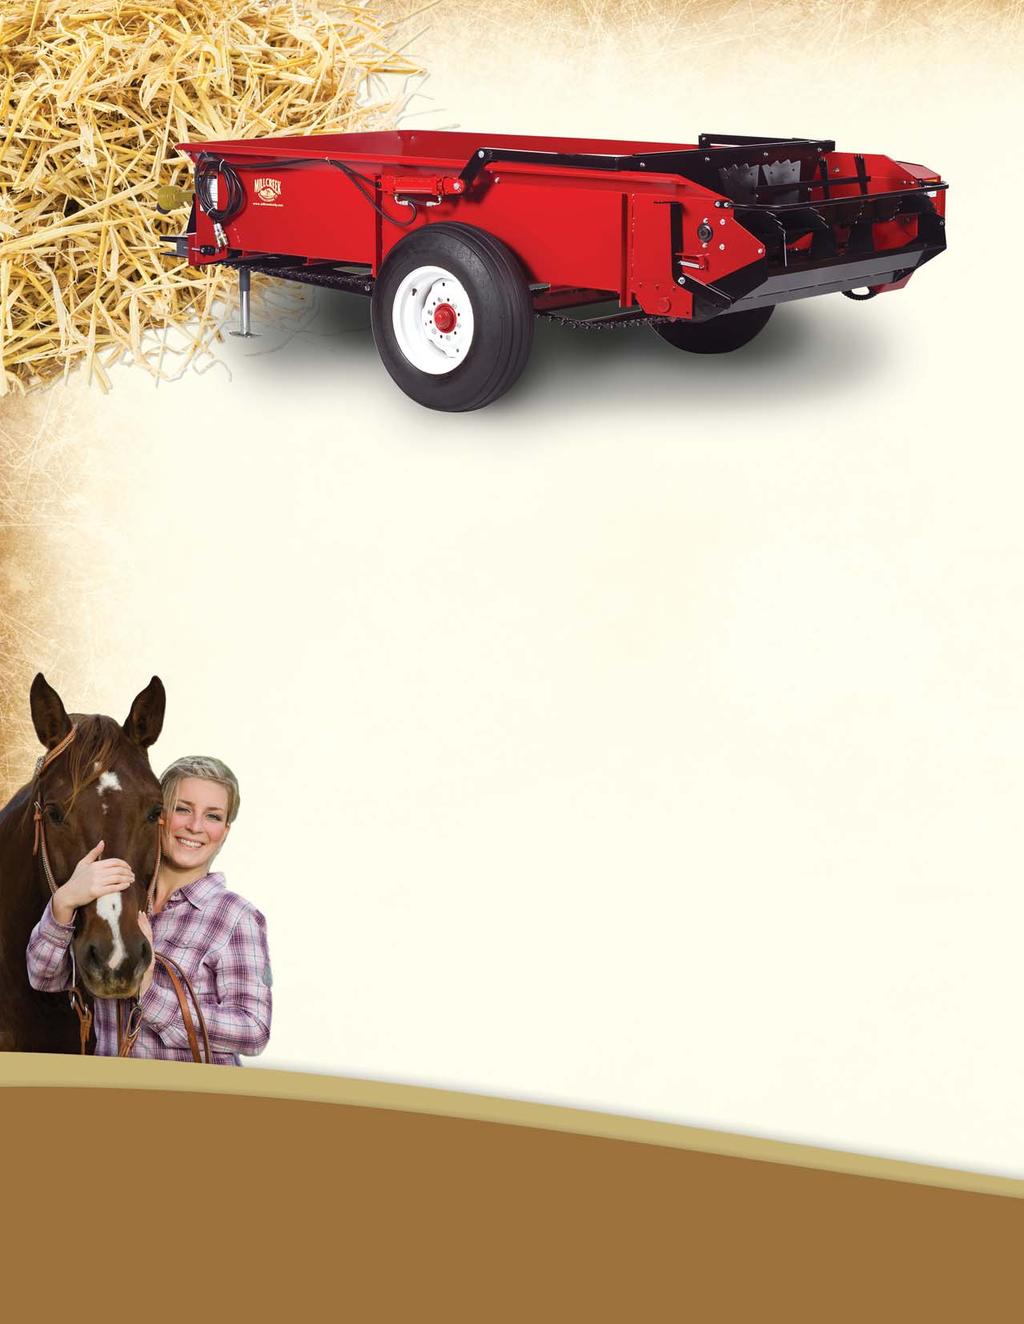 Model 97 (109 cubic feet, or 77 bushels) For more than 20+ horses or livestock Optional upper beater available This heavy-duty workhorse is one of the largest spreaders in the Millcreek line up.